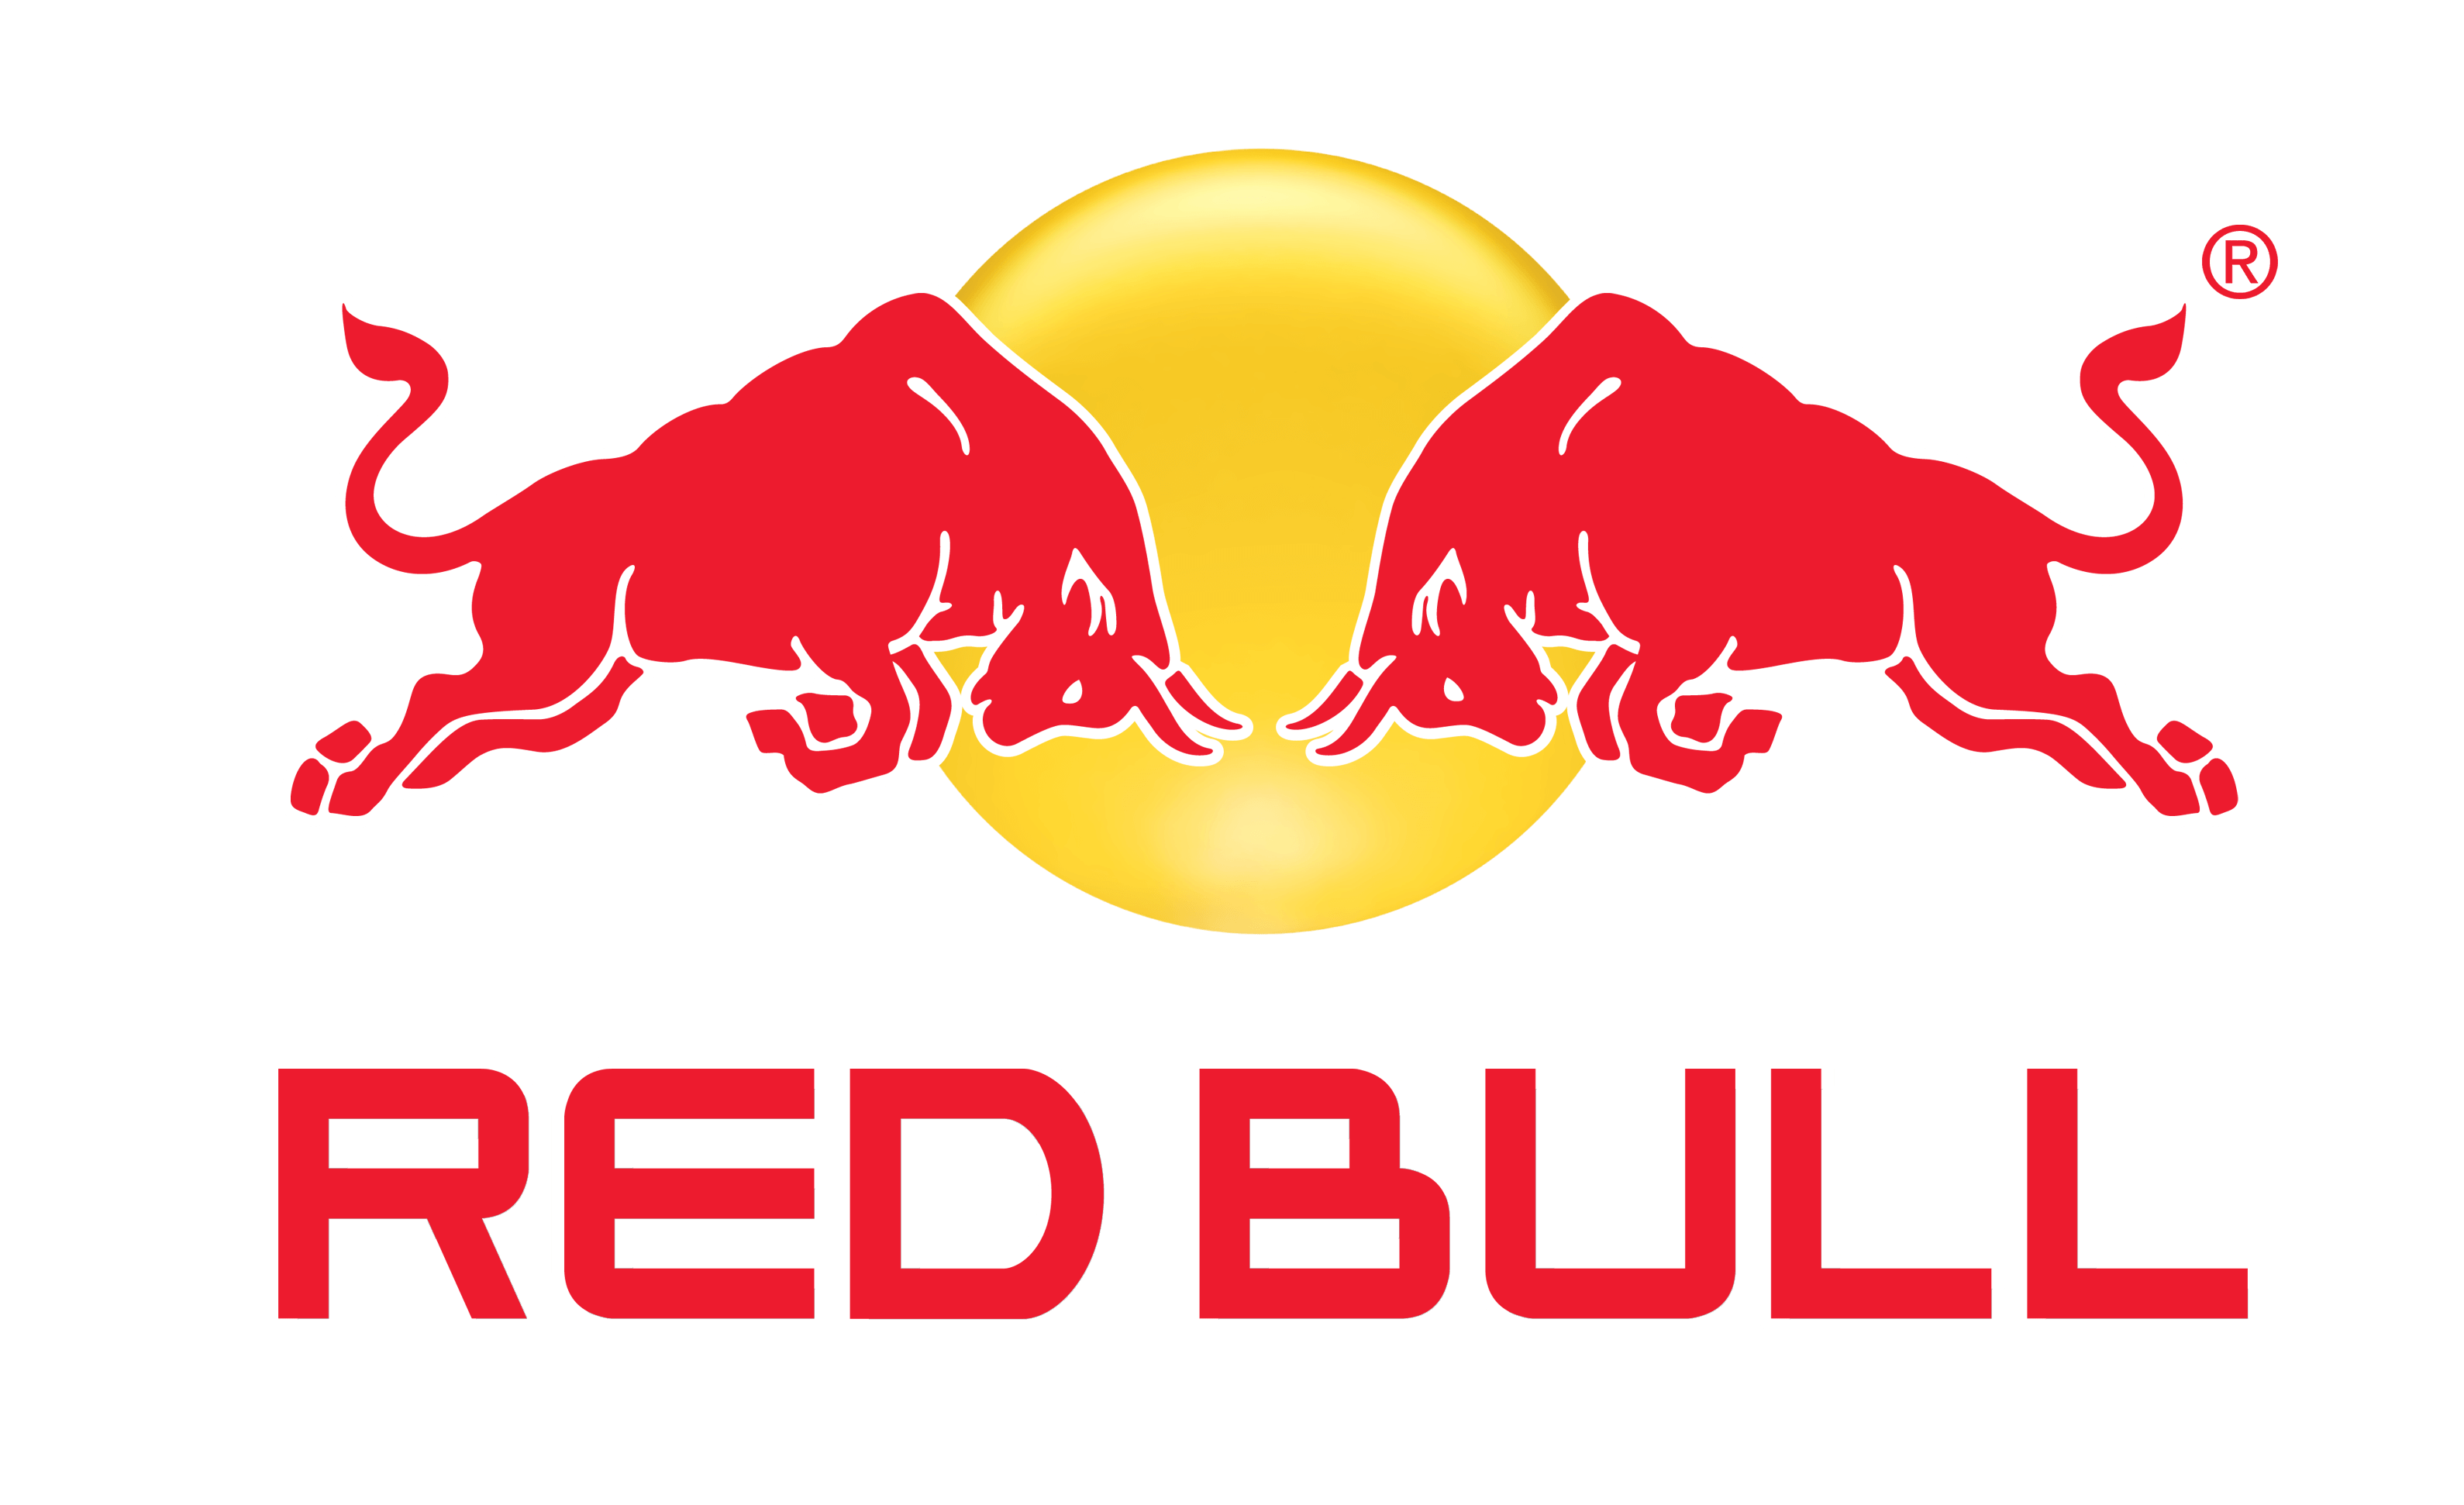 If I with Red Logo - Red Bull Logo PNG Transparent Background Download Logo Designs